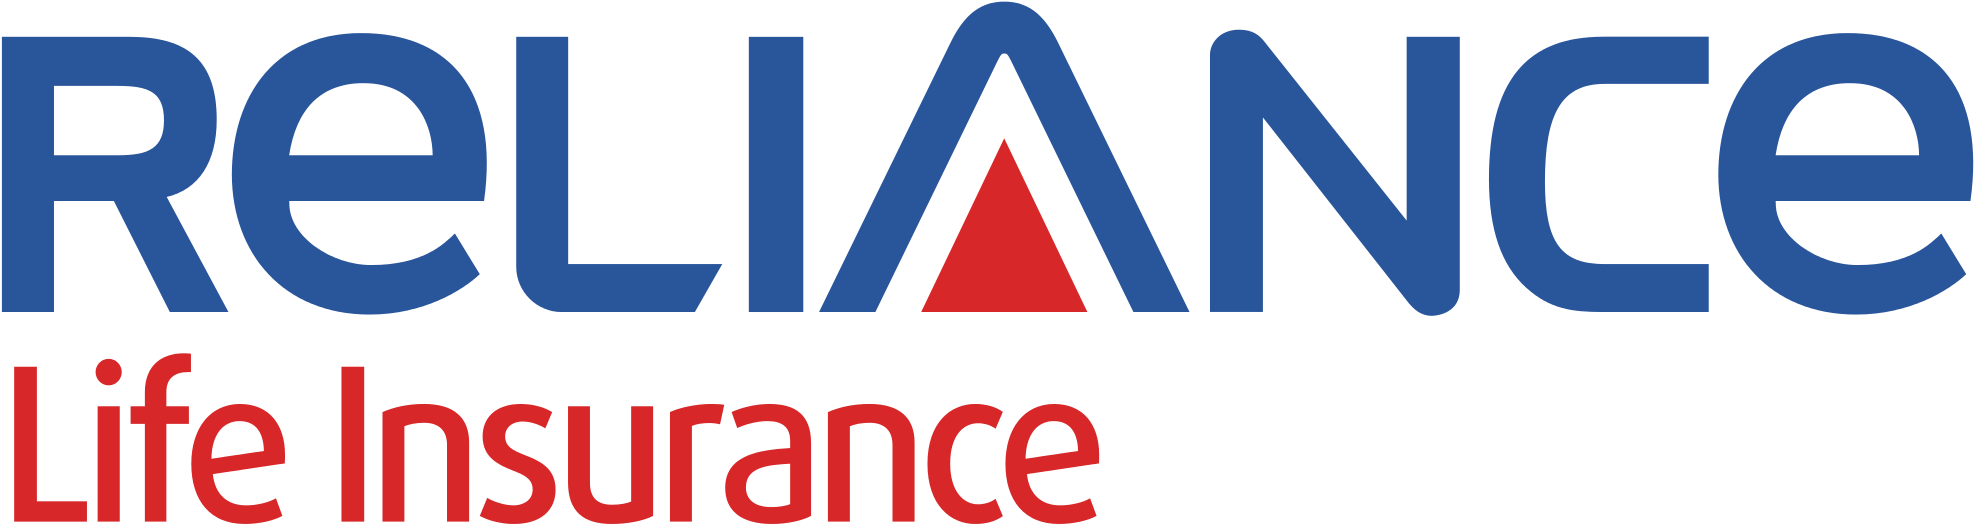 Reliance Life Insurance Png Logo - Reliance General Insurance Co Ltd (1280x365), Png Download